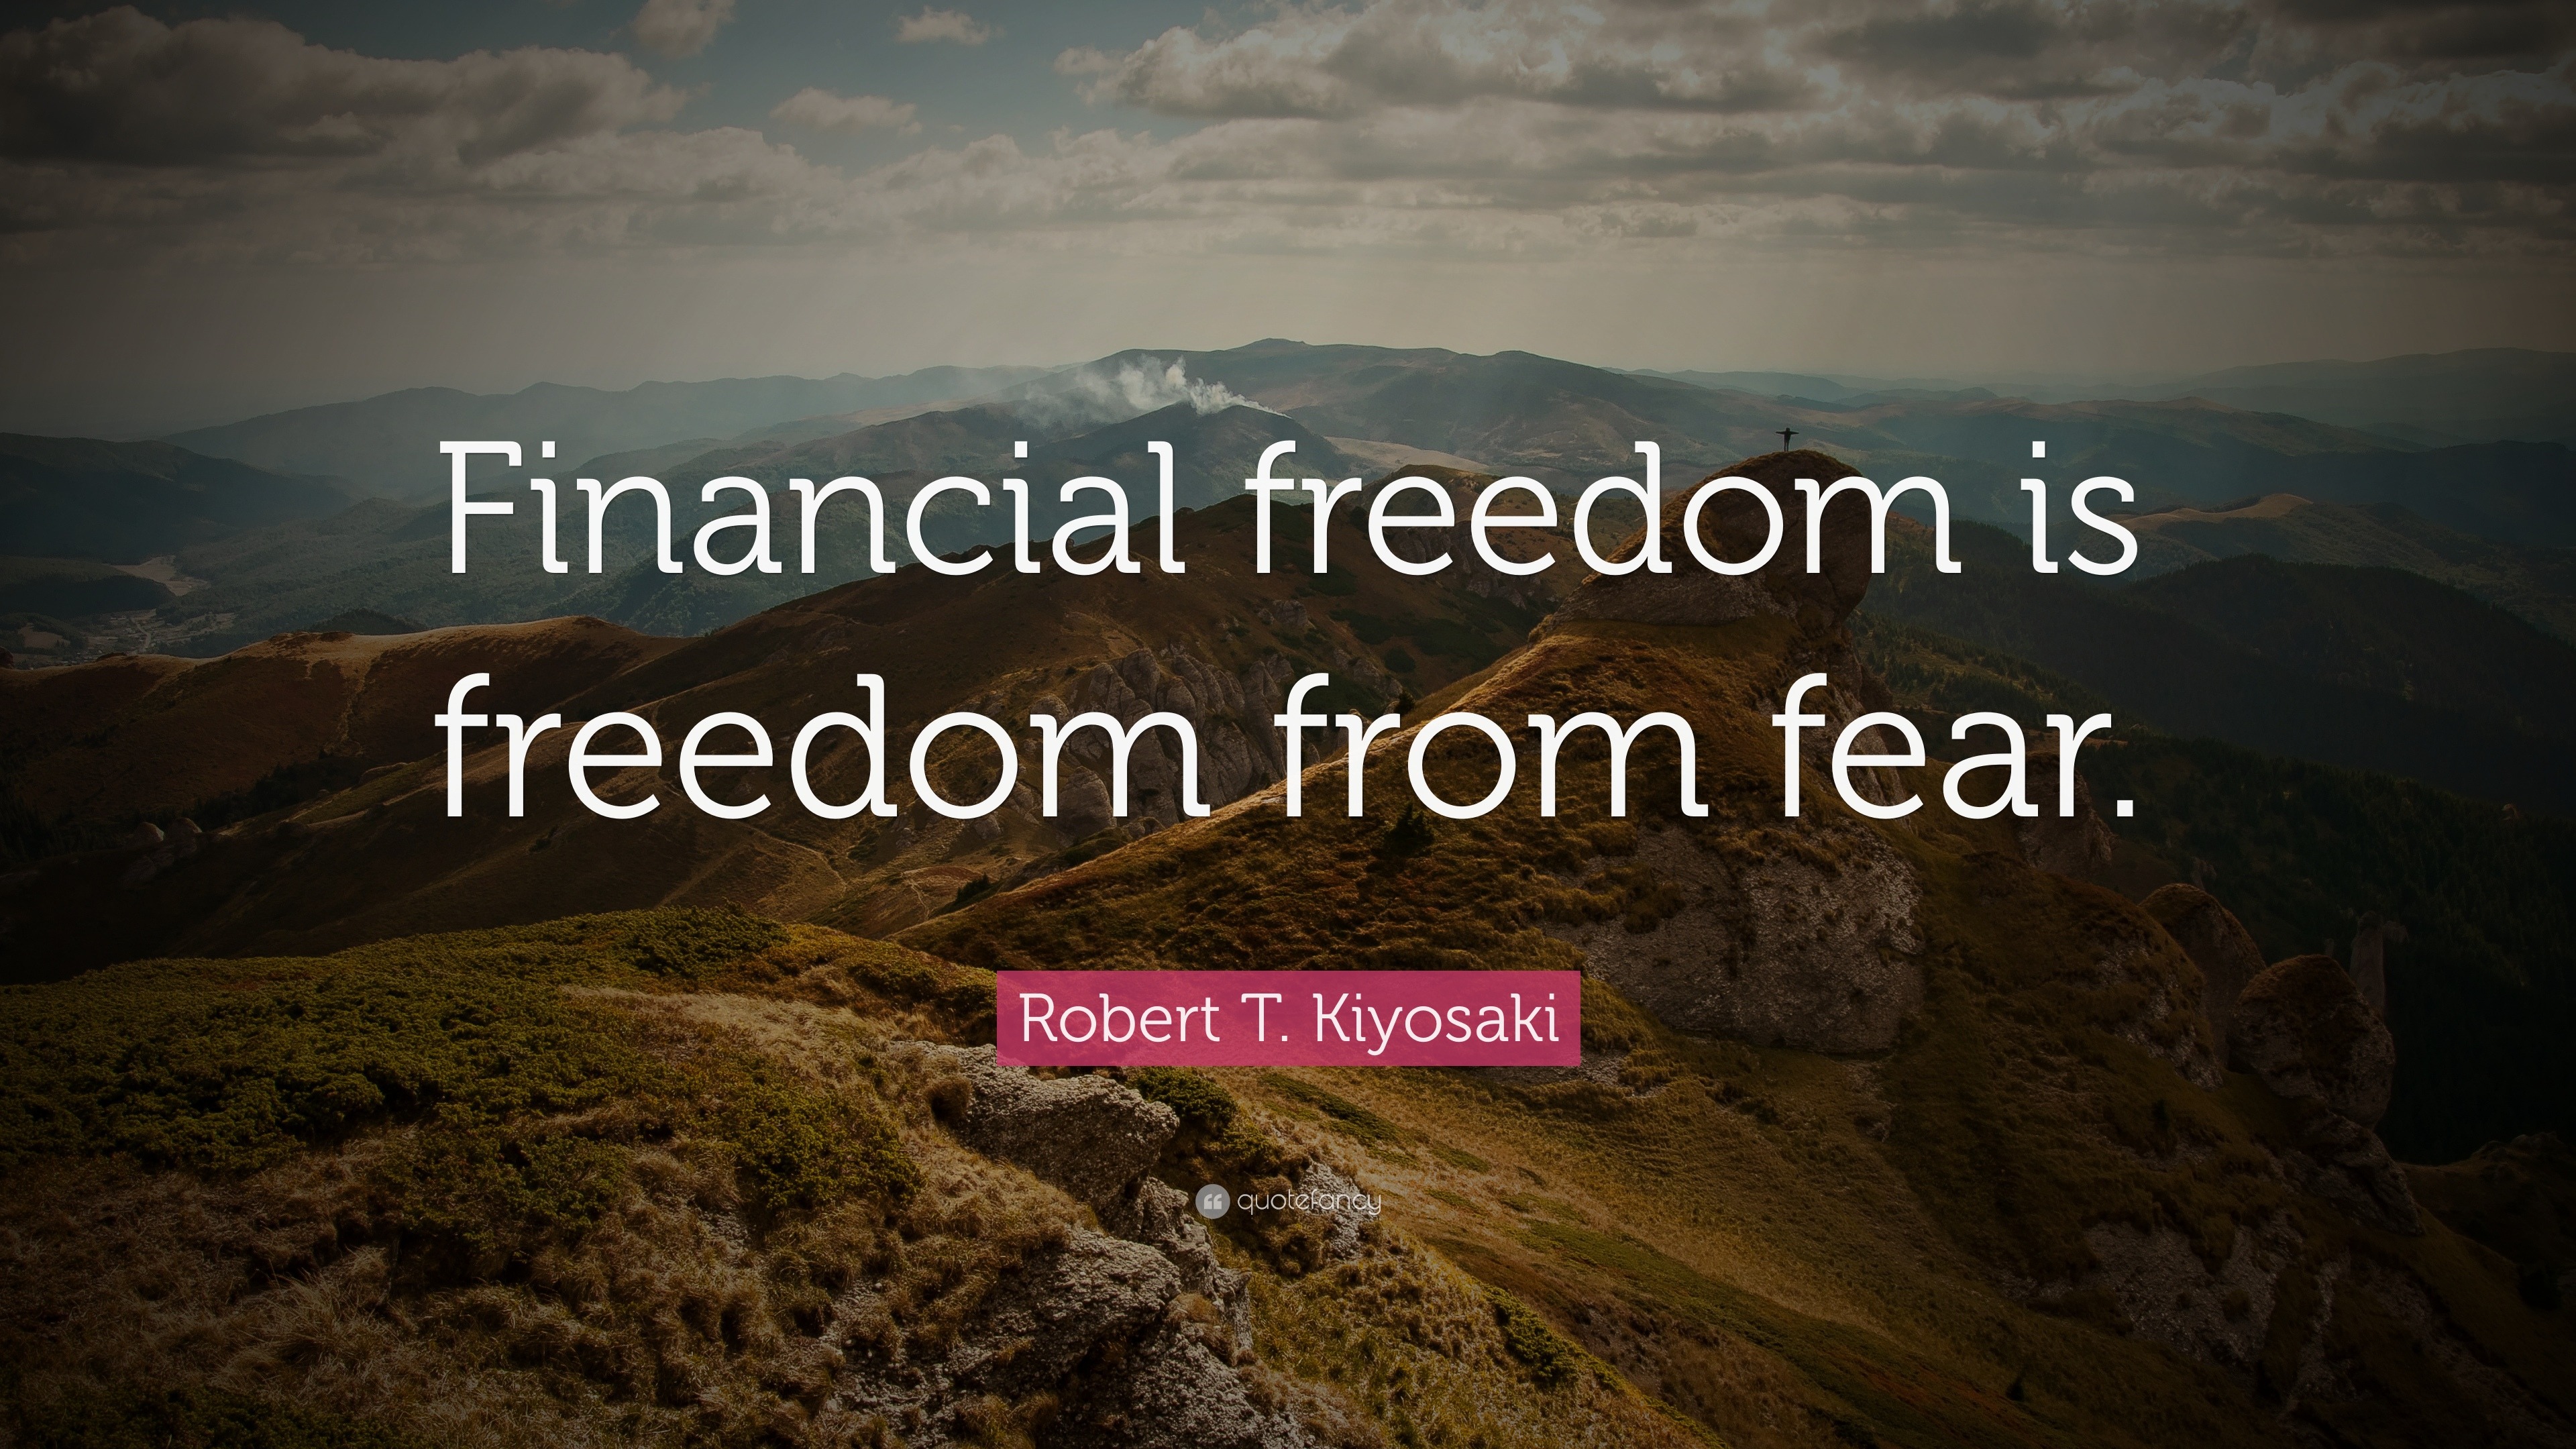 Robert T. Kiyosaki Quote: “Financial freedom is freedom from fear.”